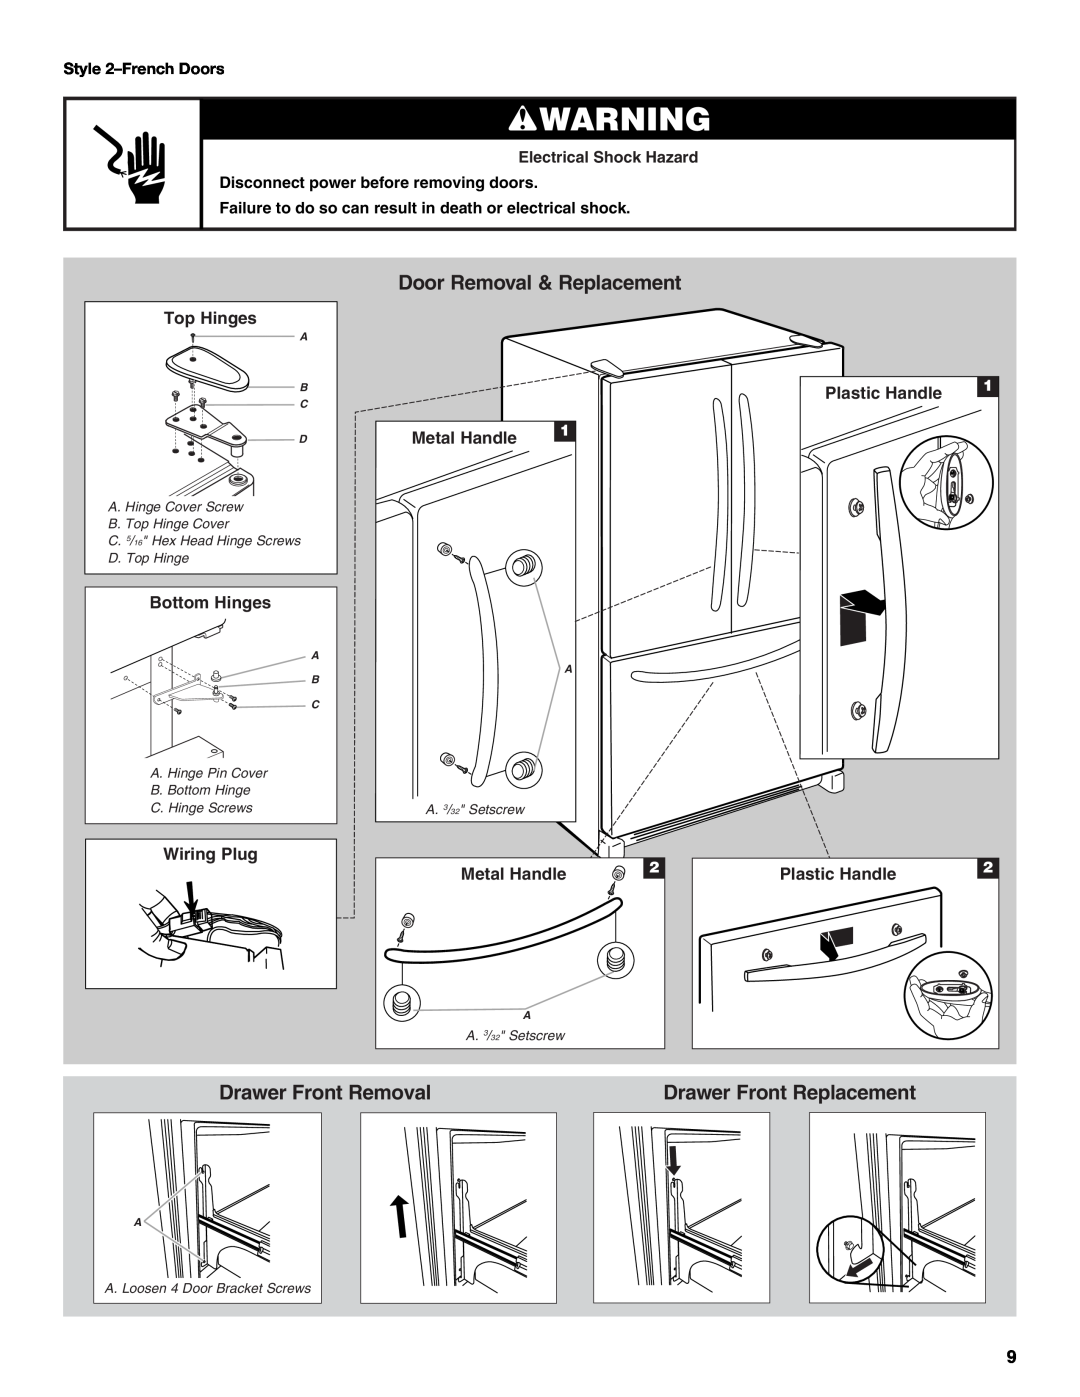 Maytag MFD2562VEW Drawer Front Removal, Drawer Front Replacement, Door Removal & Replacement, Top Hinges, Bottom Hinges 